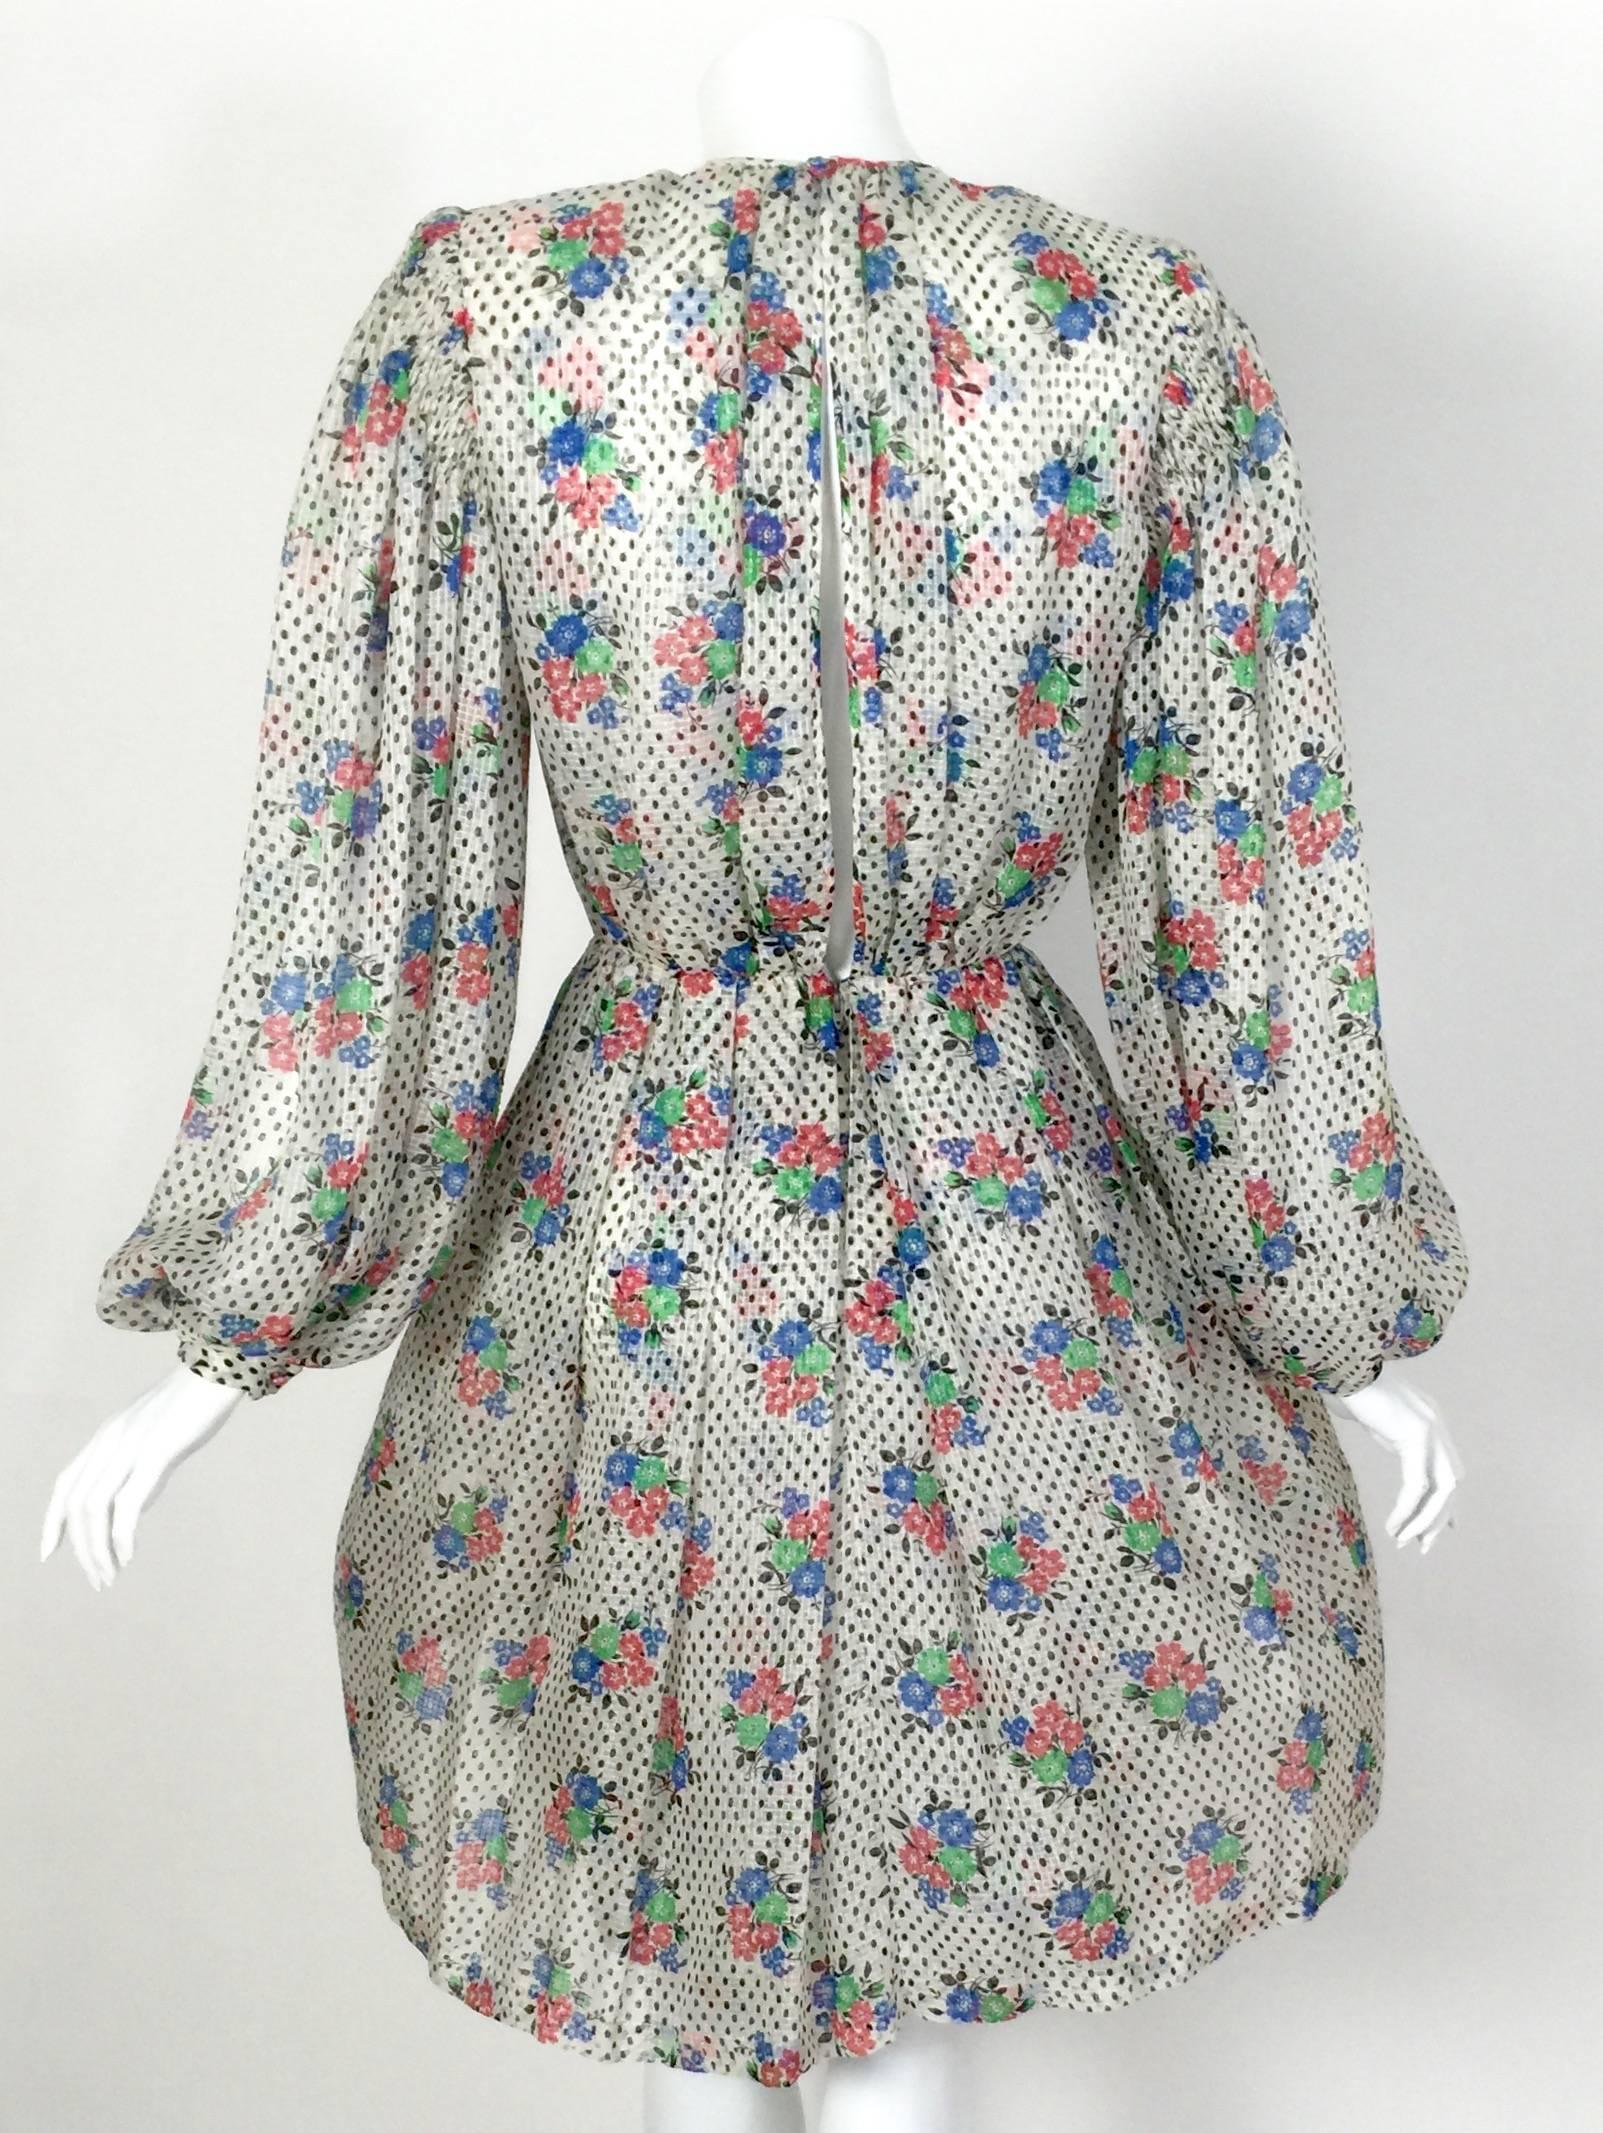 This is a stunning creation from James Galanos circa 1970. 
Done in an airy silk chiffon with a pattern of black dots, and playful florals in red, green and blue. 
From the round  neckline, to the delicate gathers just below the shoulders and